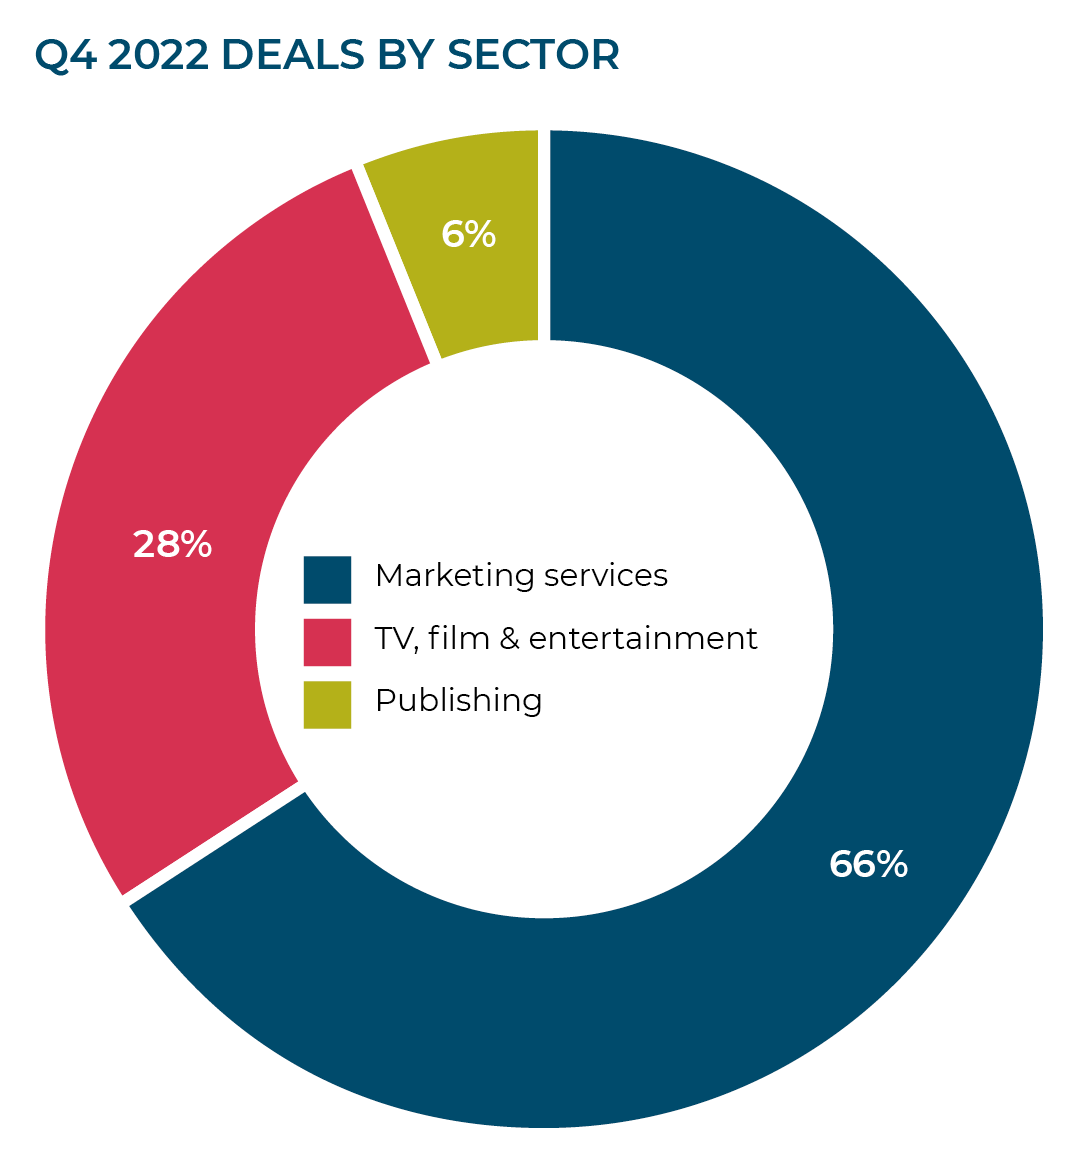 Q4 2022 DEALS BY SECTOR